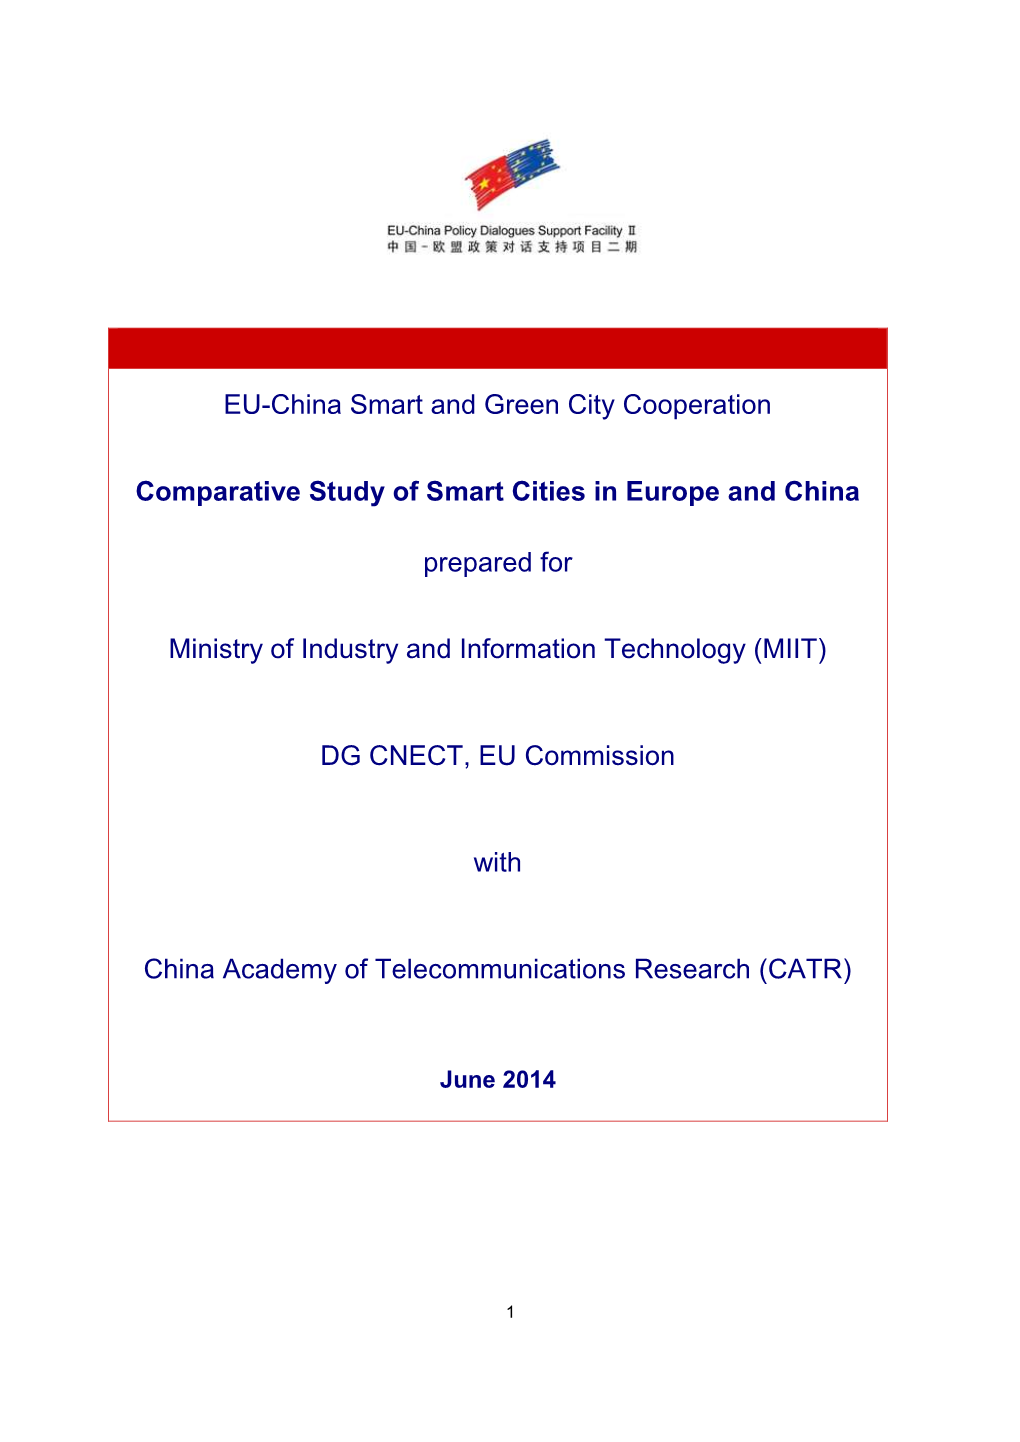 Comparative Study of Smart Cities in Europe and China